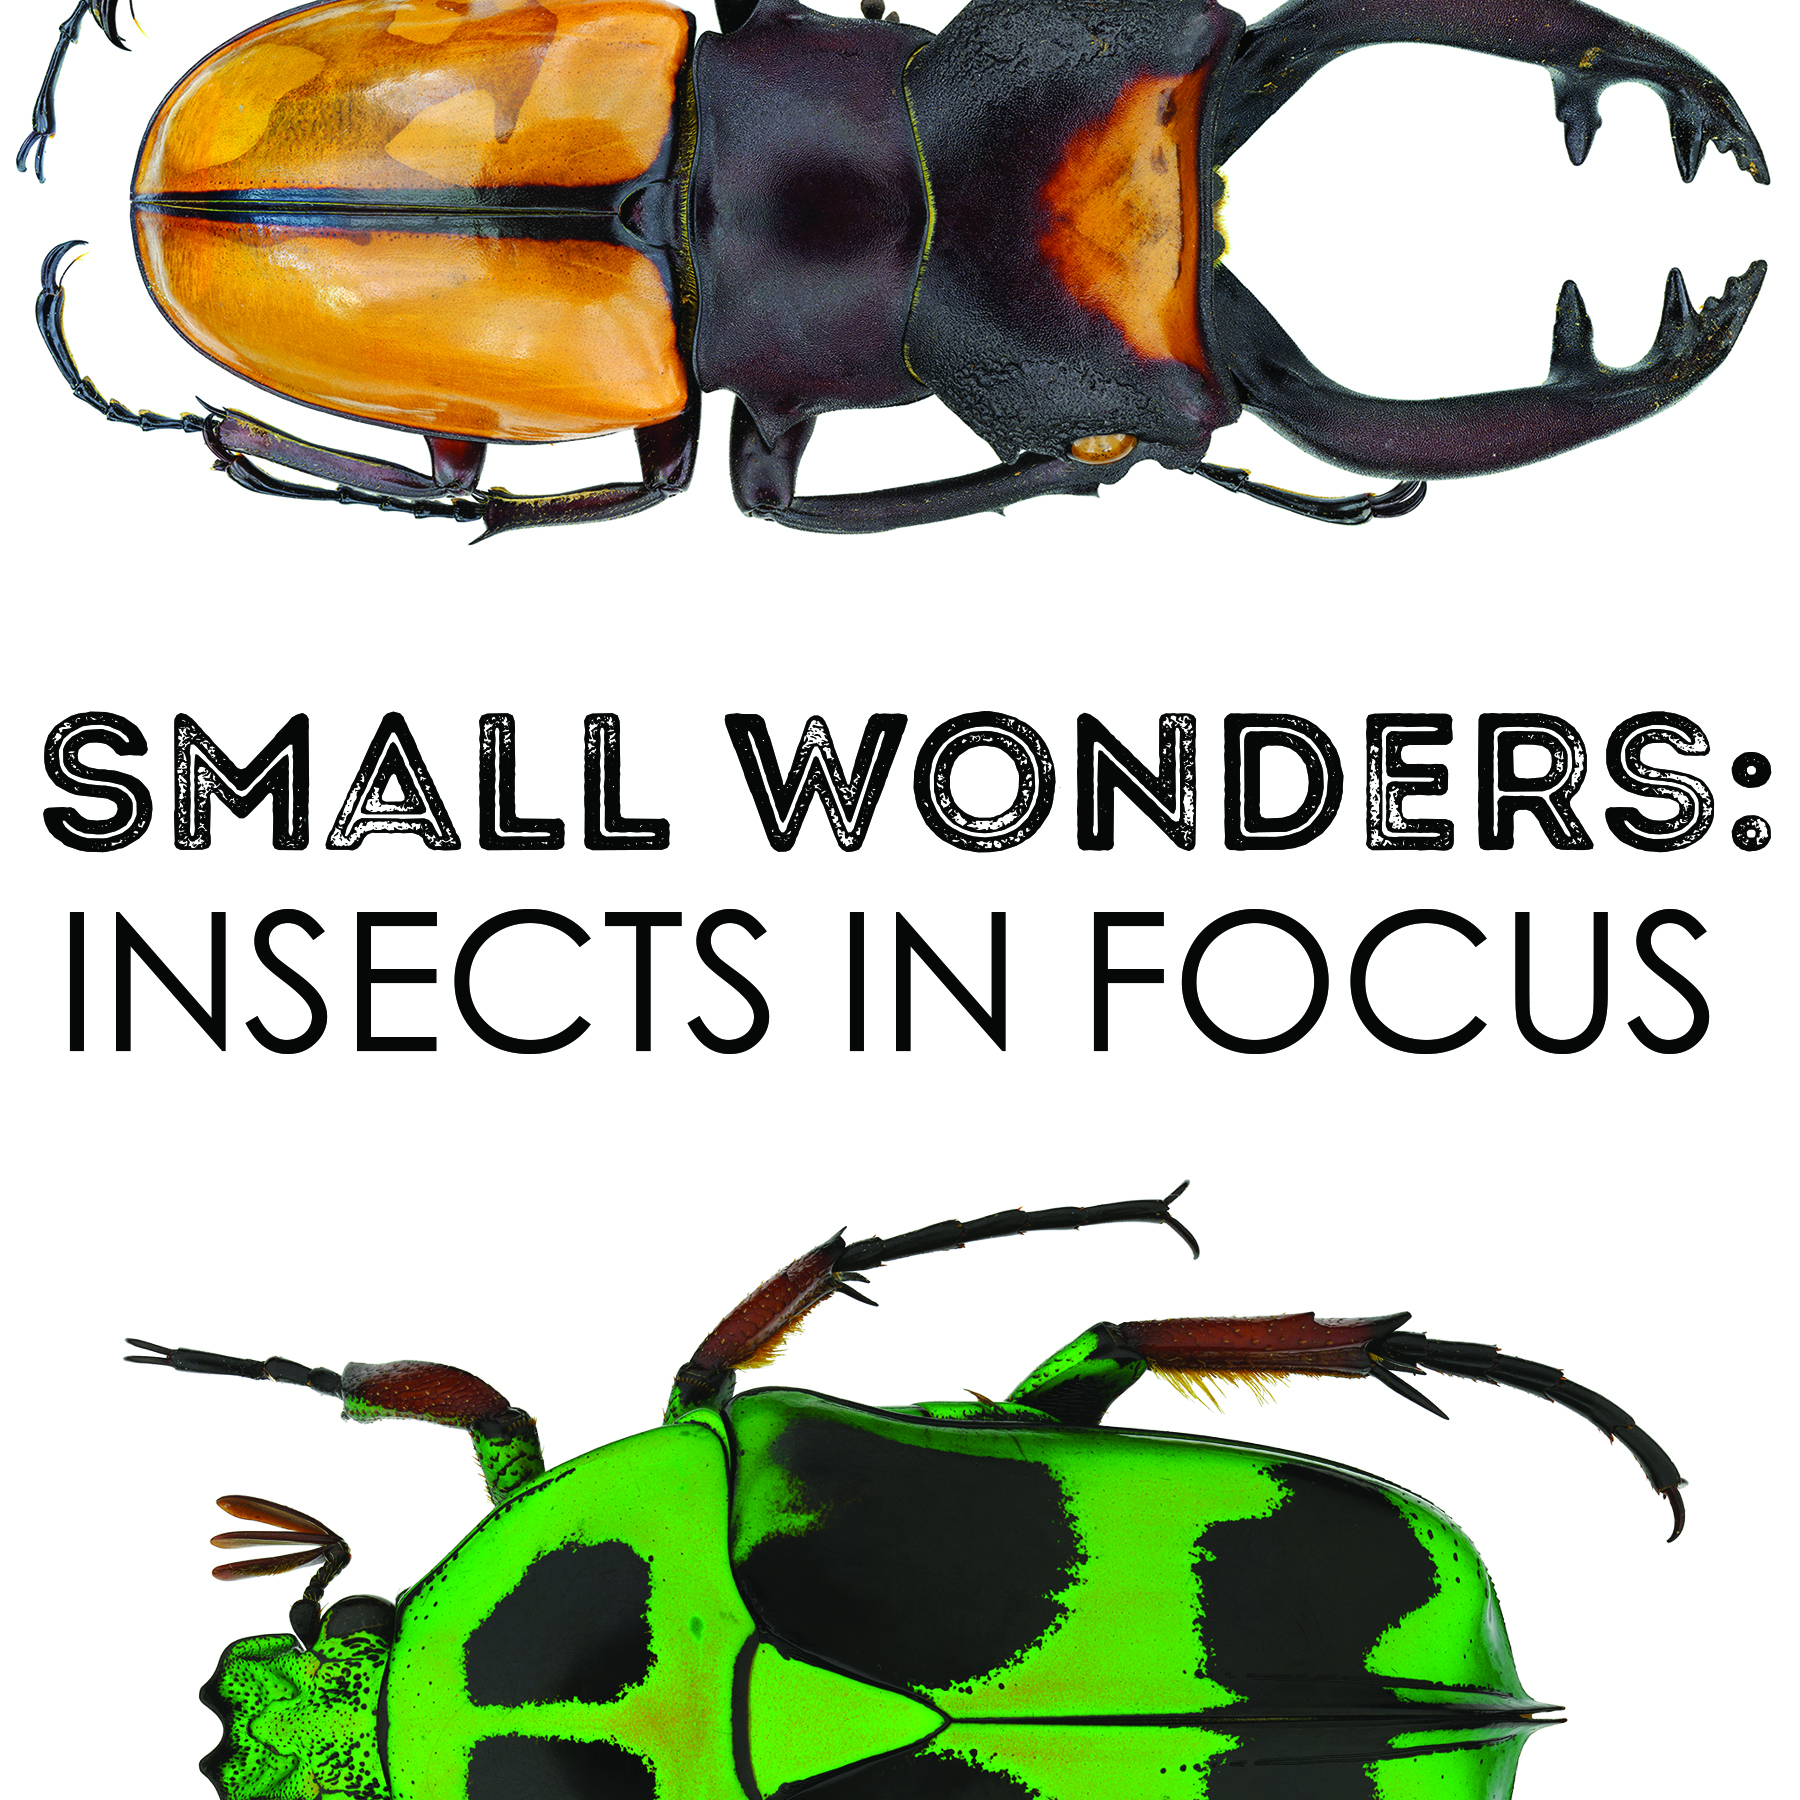 Small Wonders: Insects in Focus